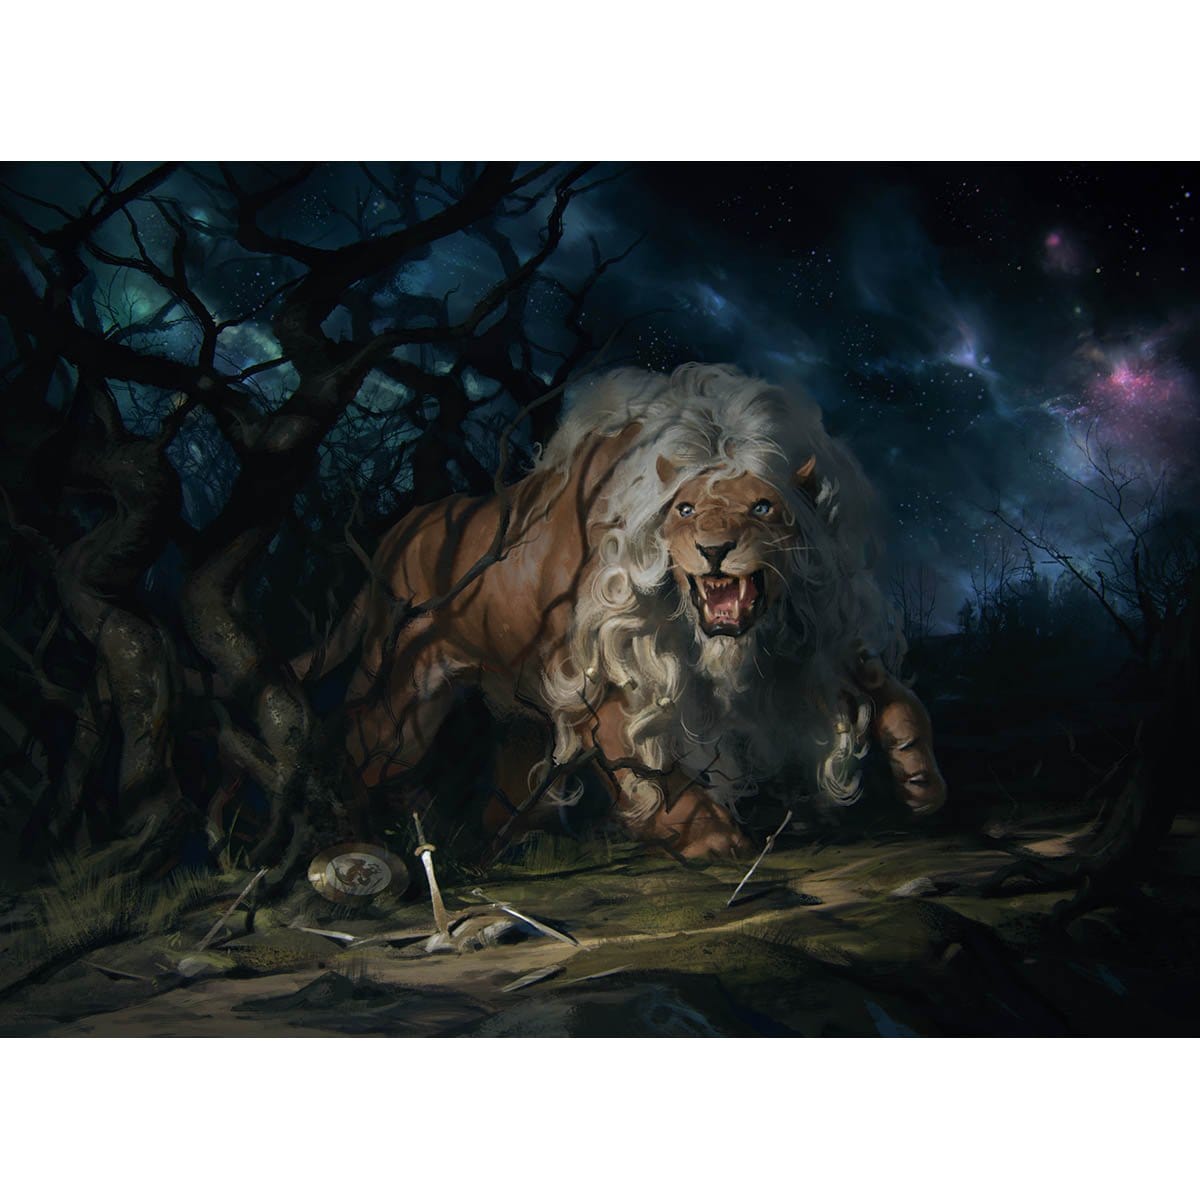 Fleecemane Lion Print - Print - Original Magic Art - Accessories for Magic the Gathering and other card games